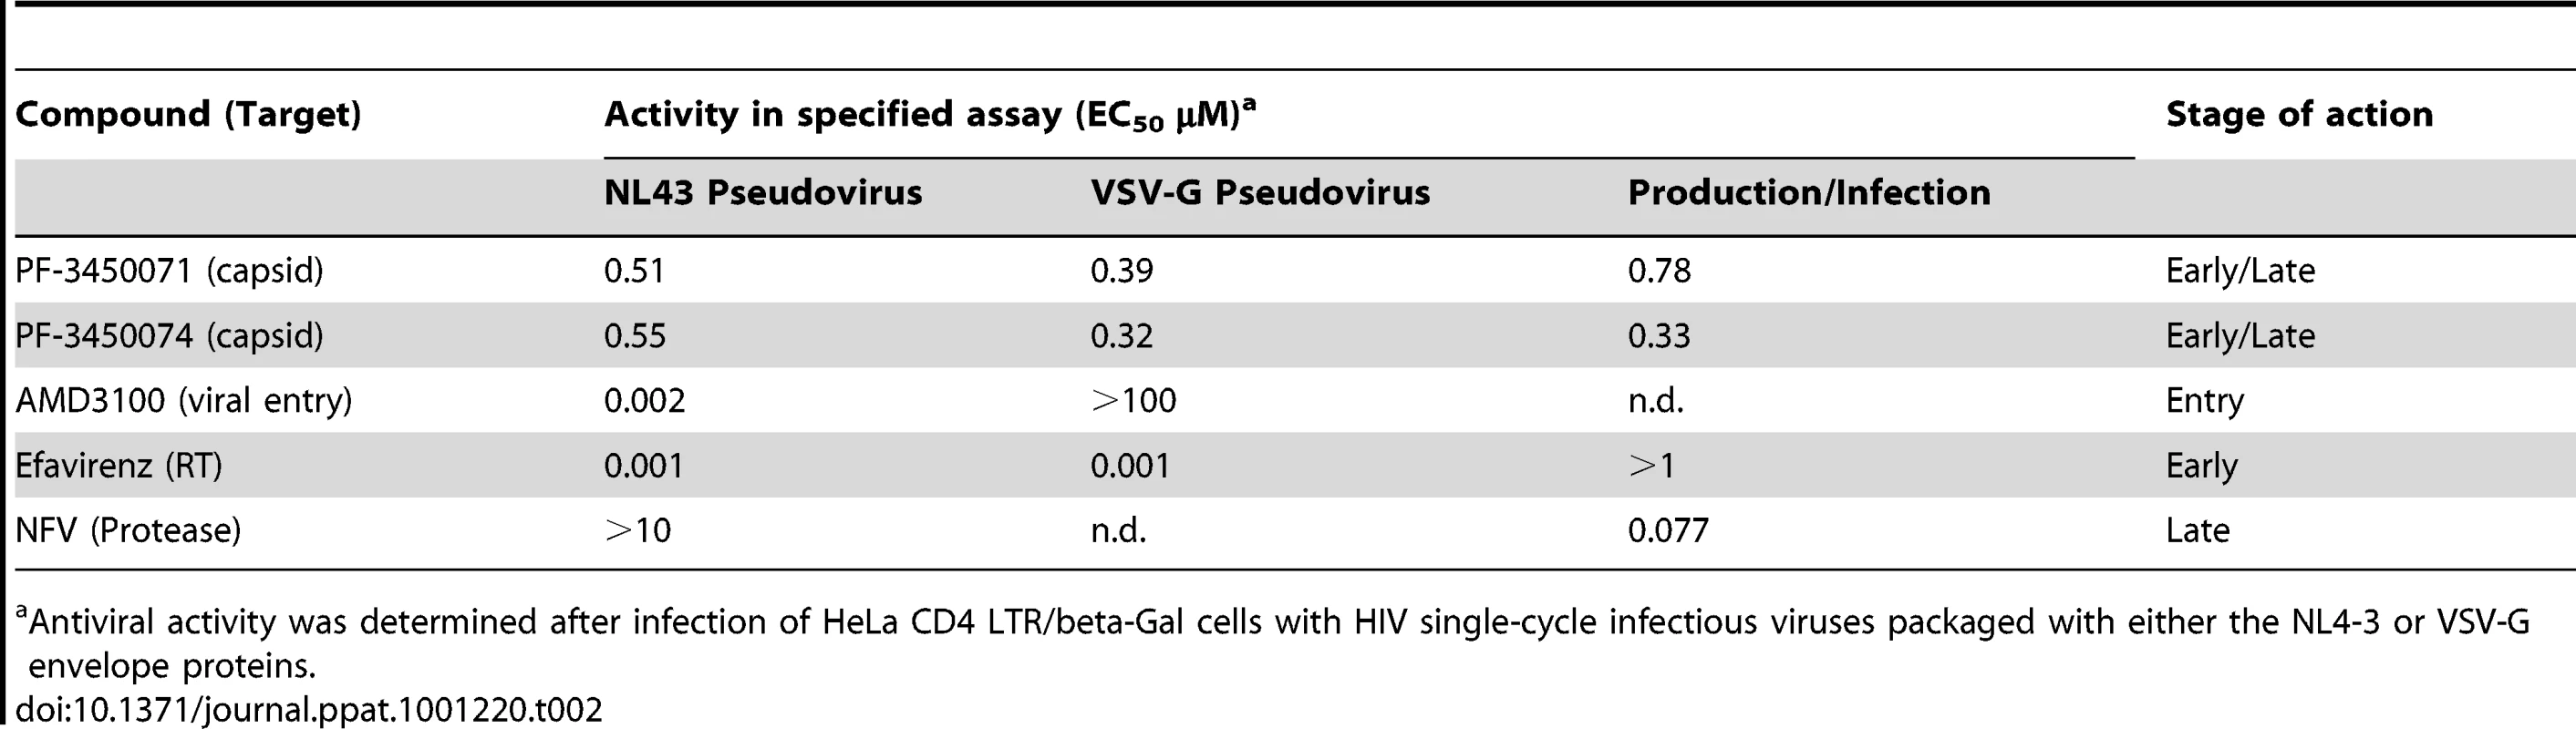 Activity of antiviral compounds in selected assays.